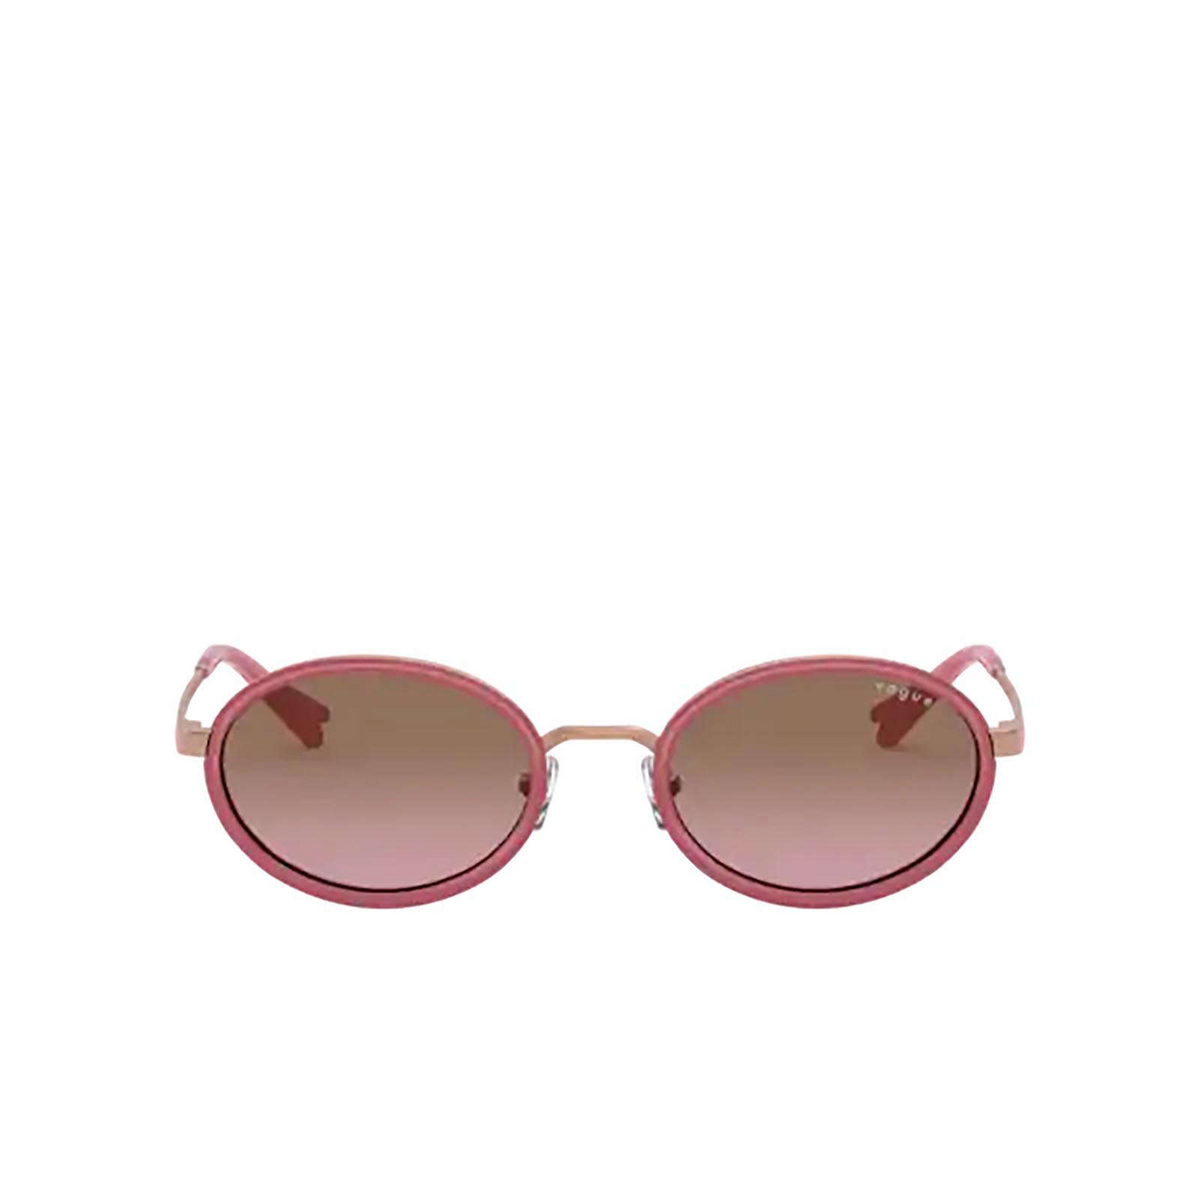 Vogue® Oval Sunglasses: VO4167S color Rose Gold 507514 - front view.